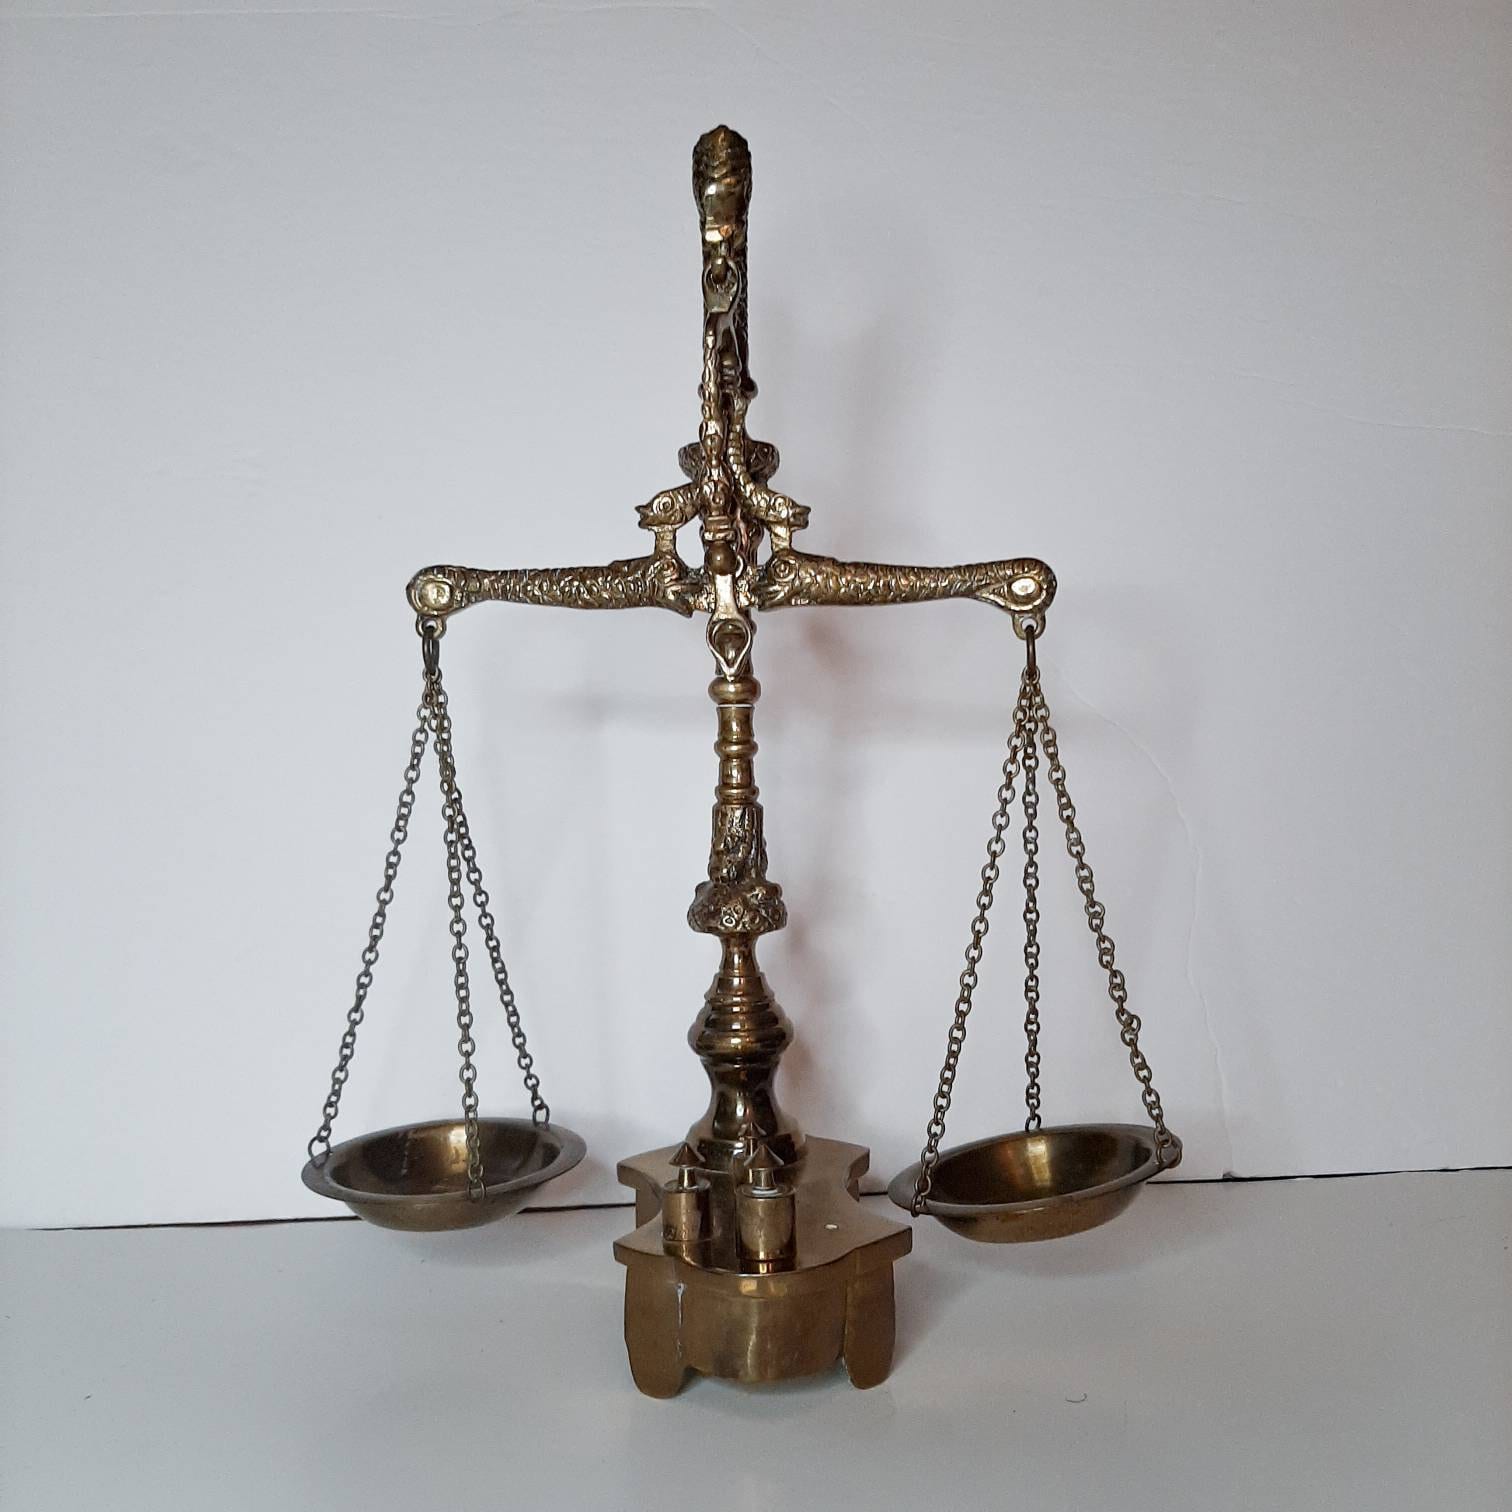 Antique Balance Scales: Weighing the Different Types